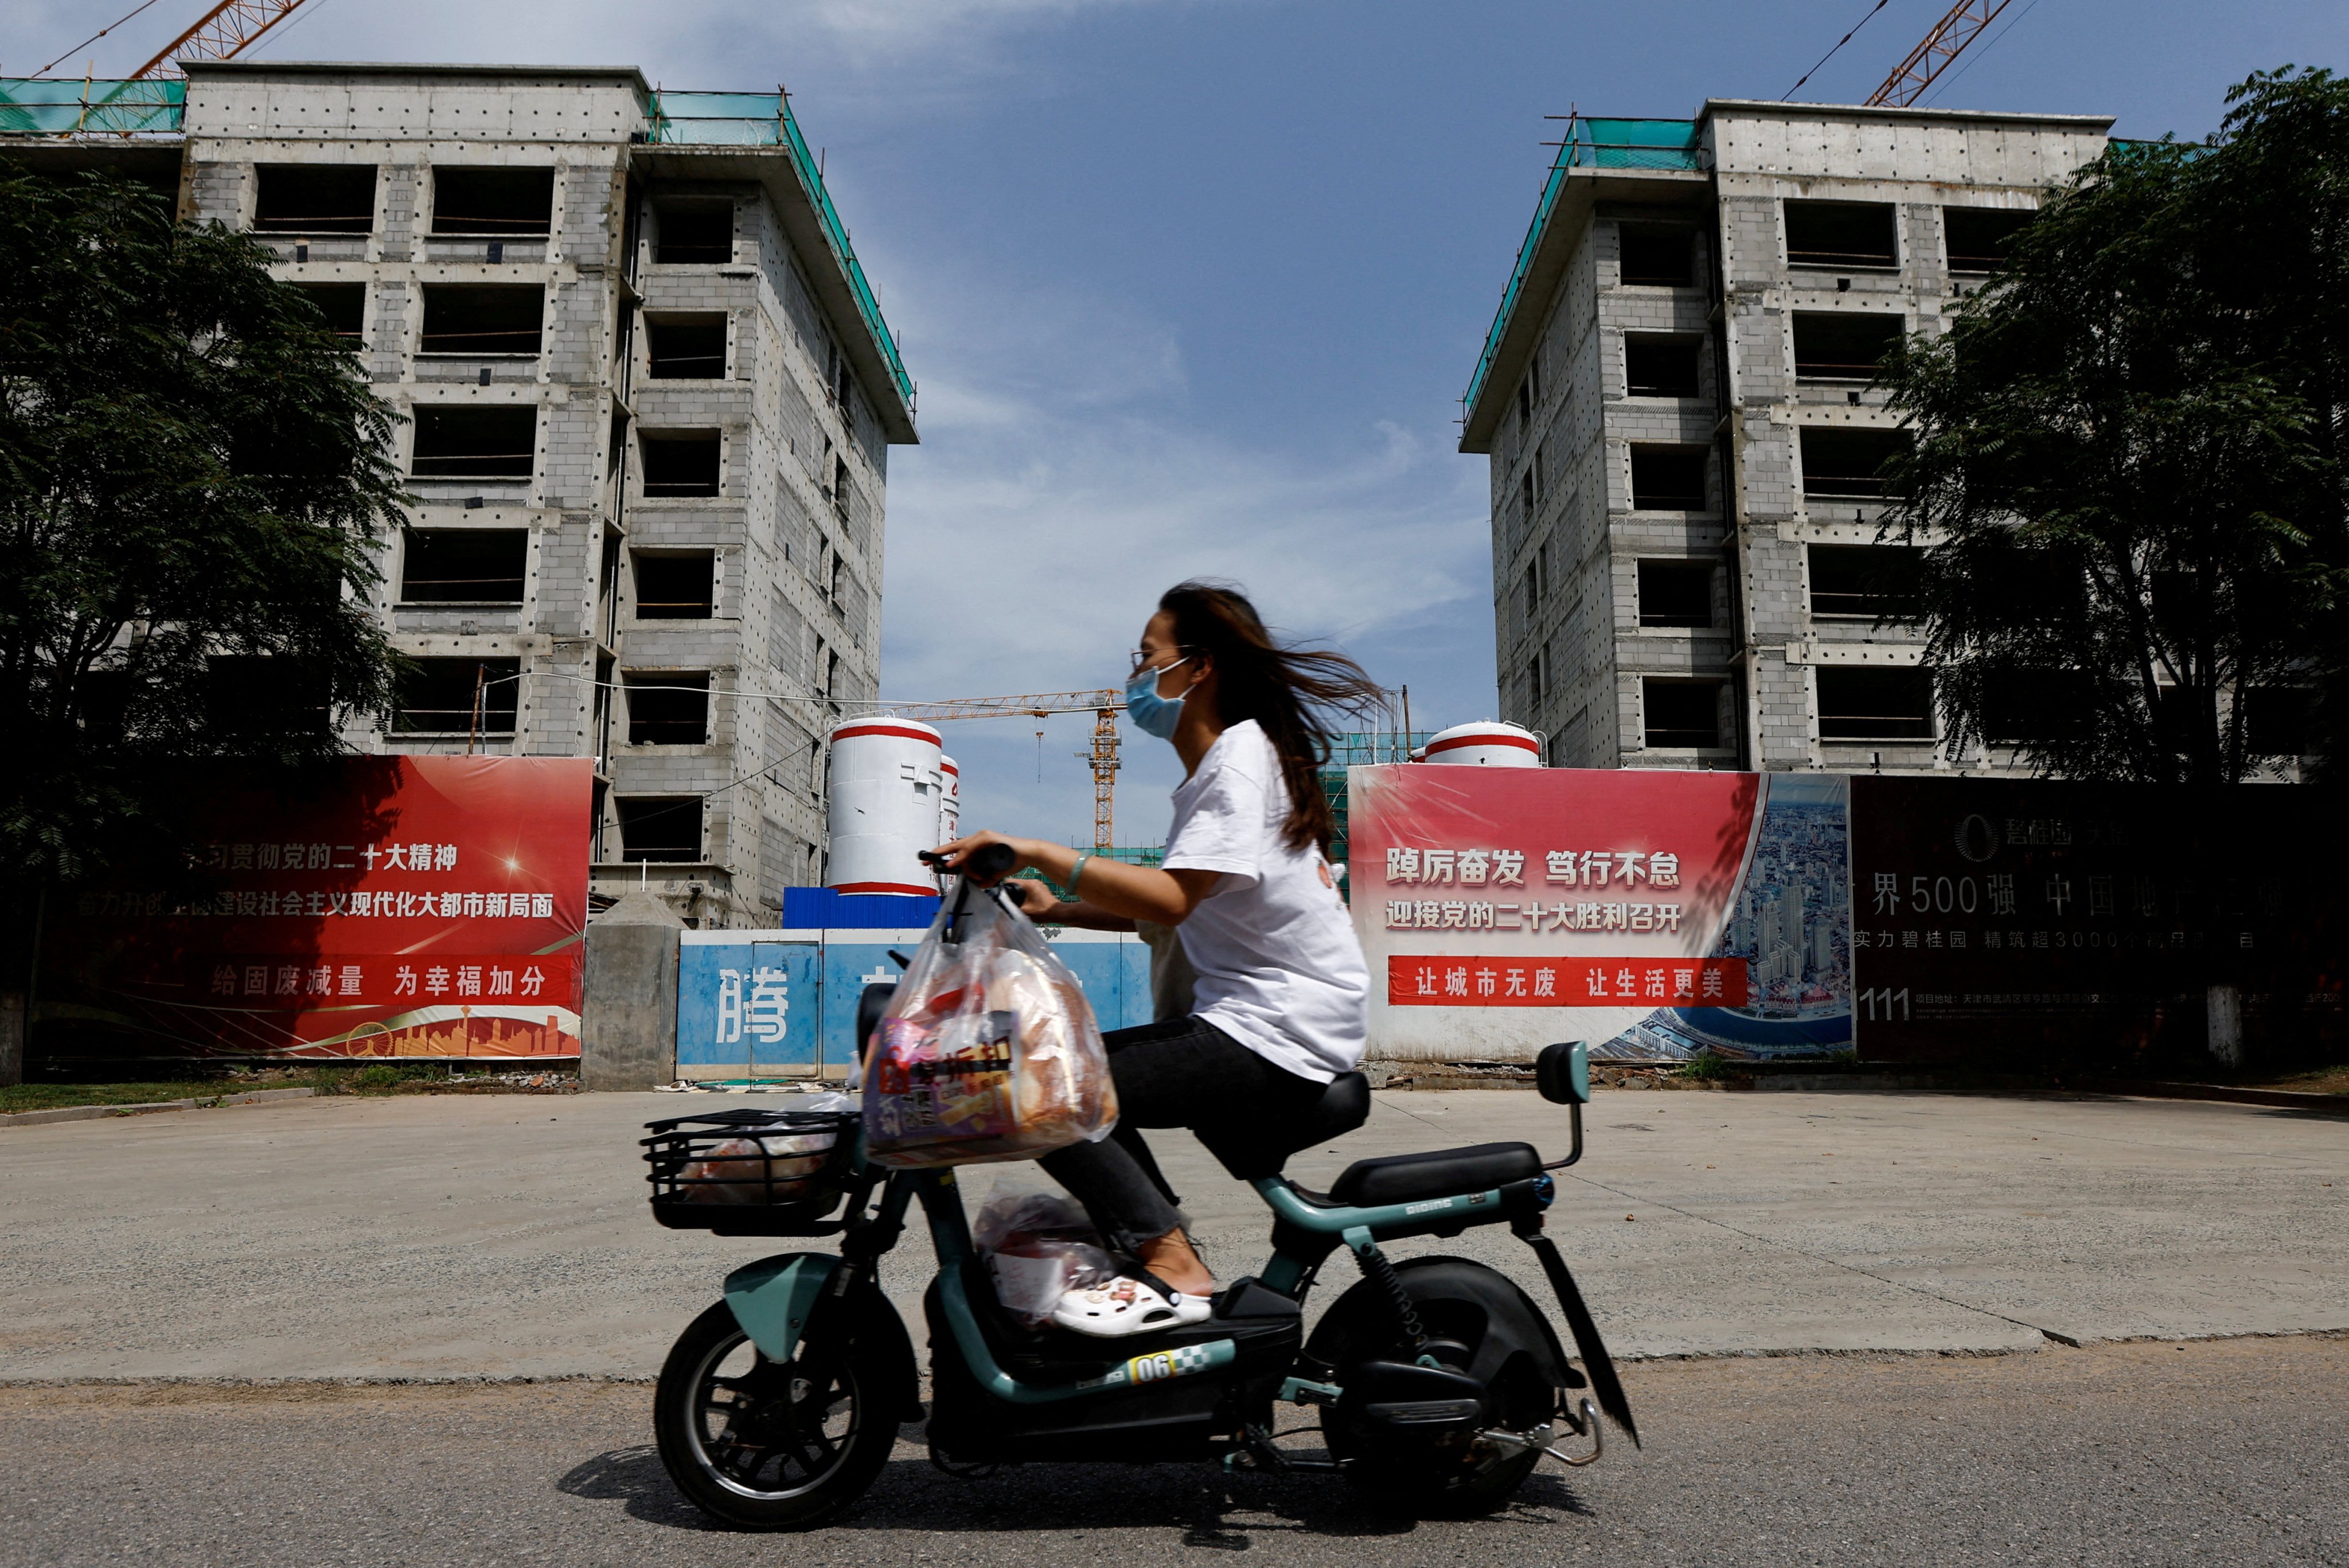 A woman rides a scooter past a construction site for residential buildings by indebted Chinese developer Country Garden in Tianjin on August 18. Photo: Reuters